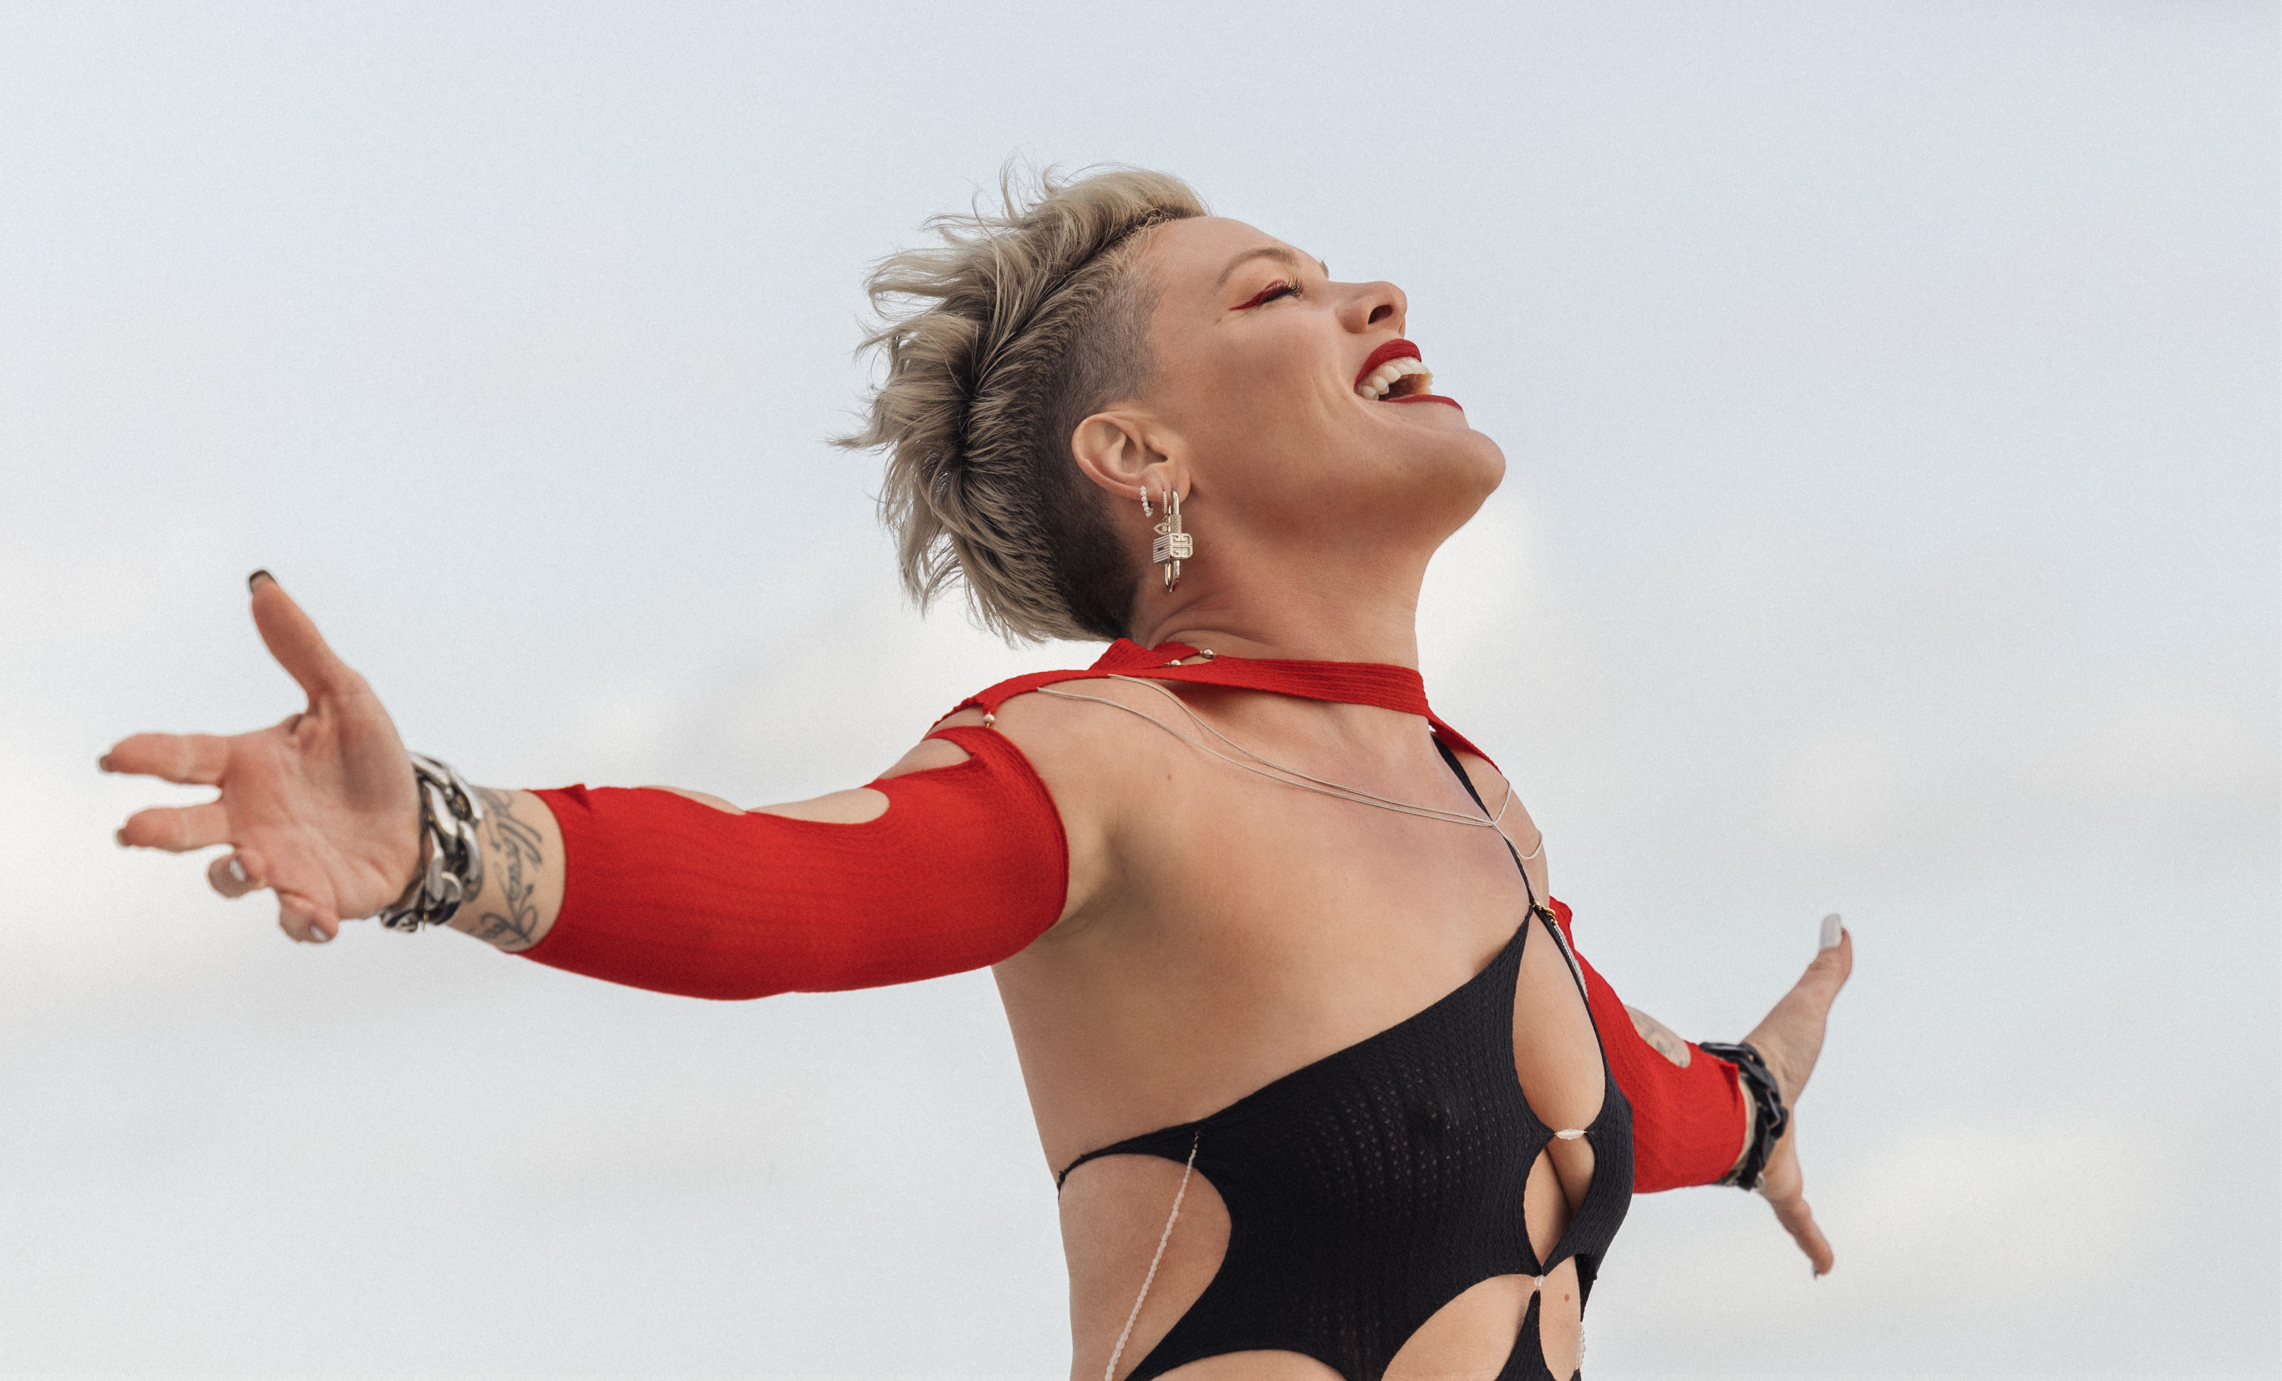 P!nk Opens Up About Near-Death Overdose & Drug-Dealing Past: “I Was On Ecstasy, Crystal, All Kinds of Things”